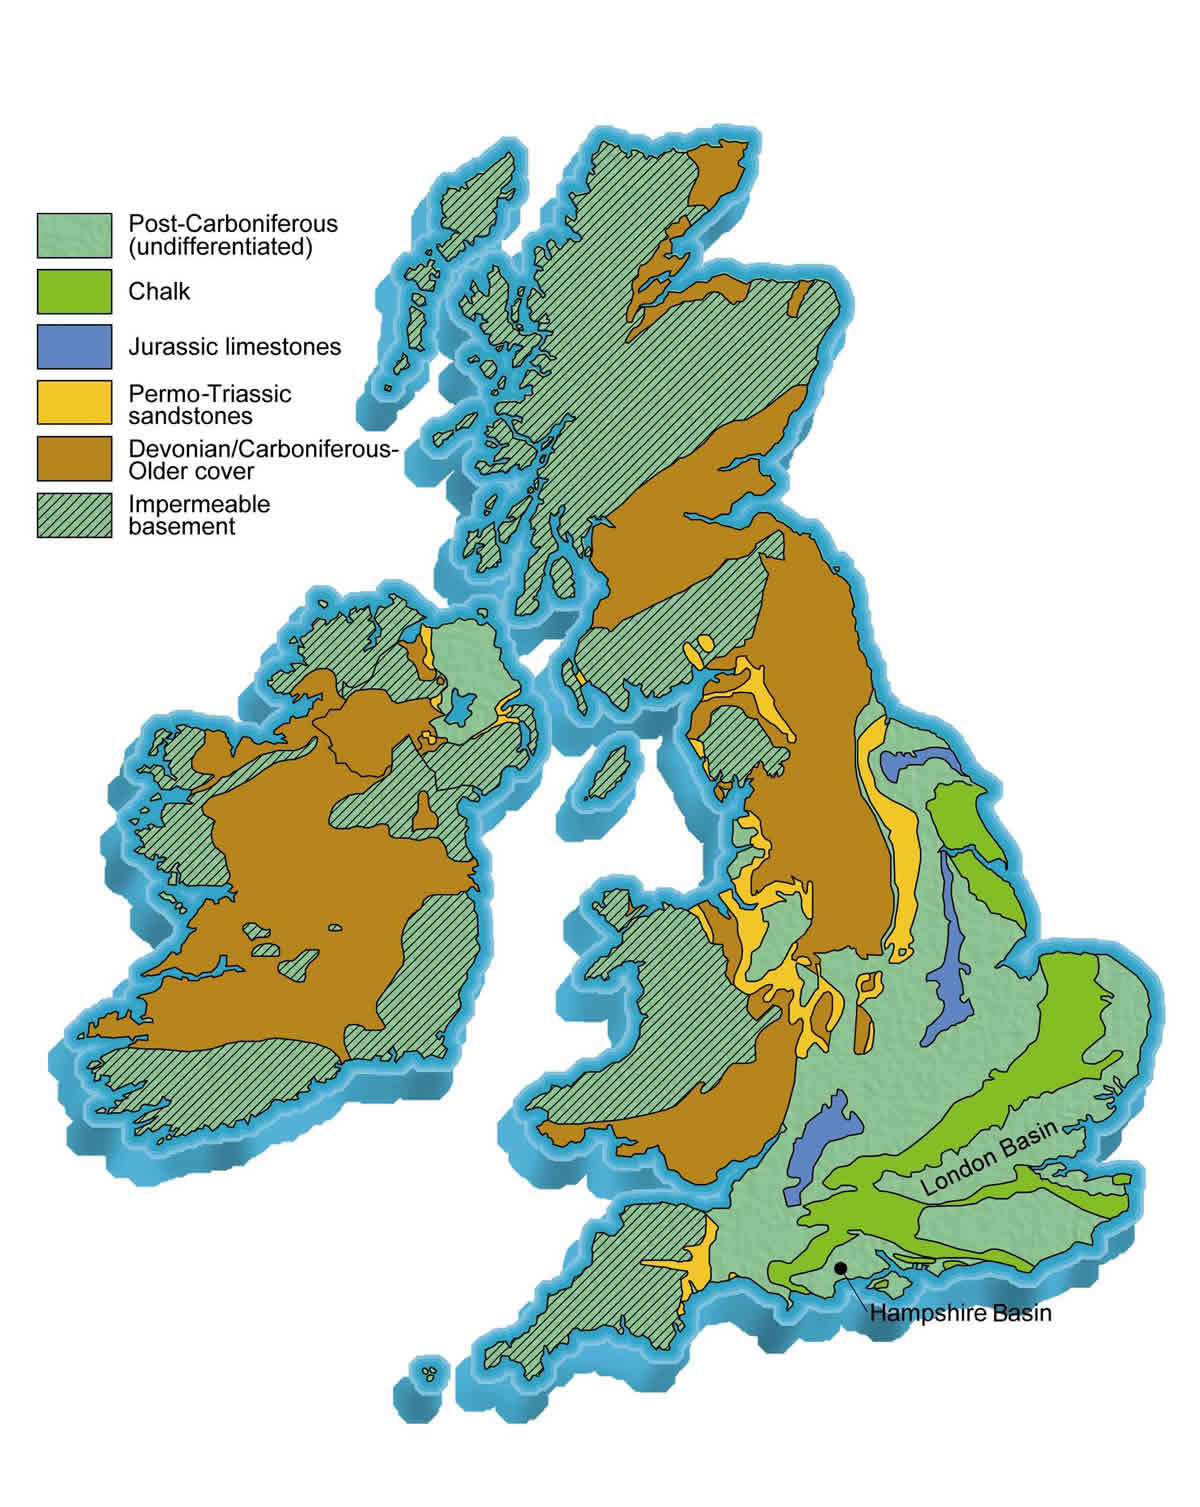 Map of the United Kingdom with the age of rocks